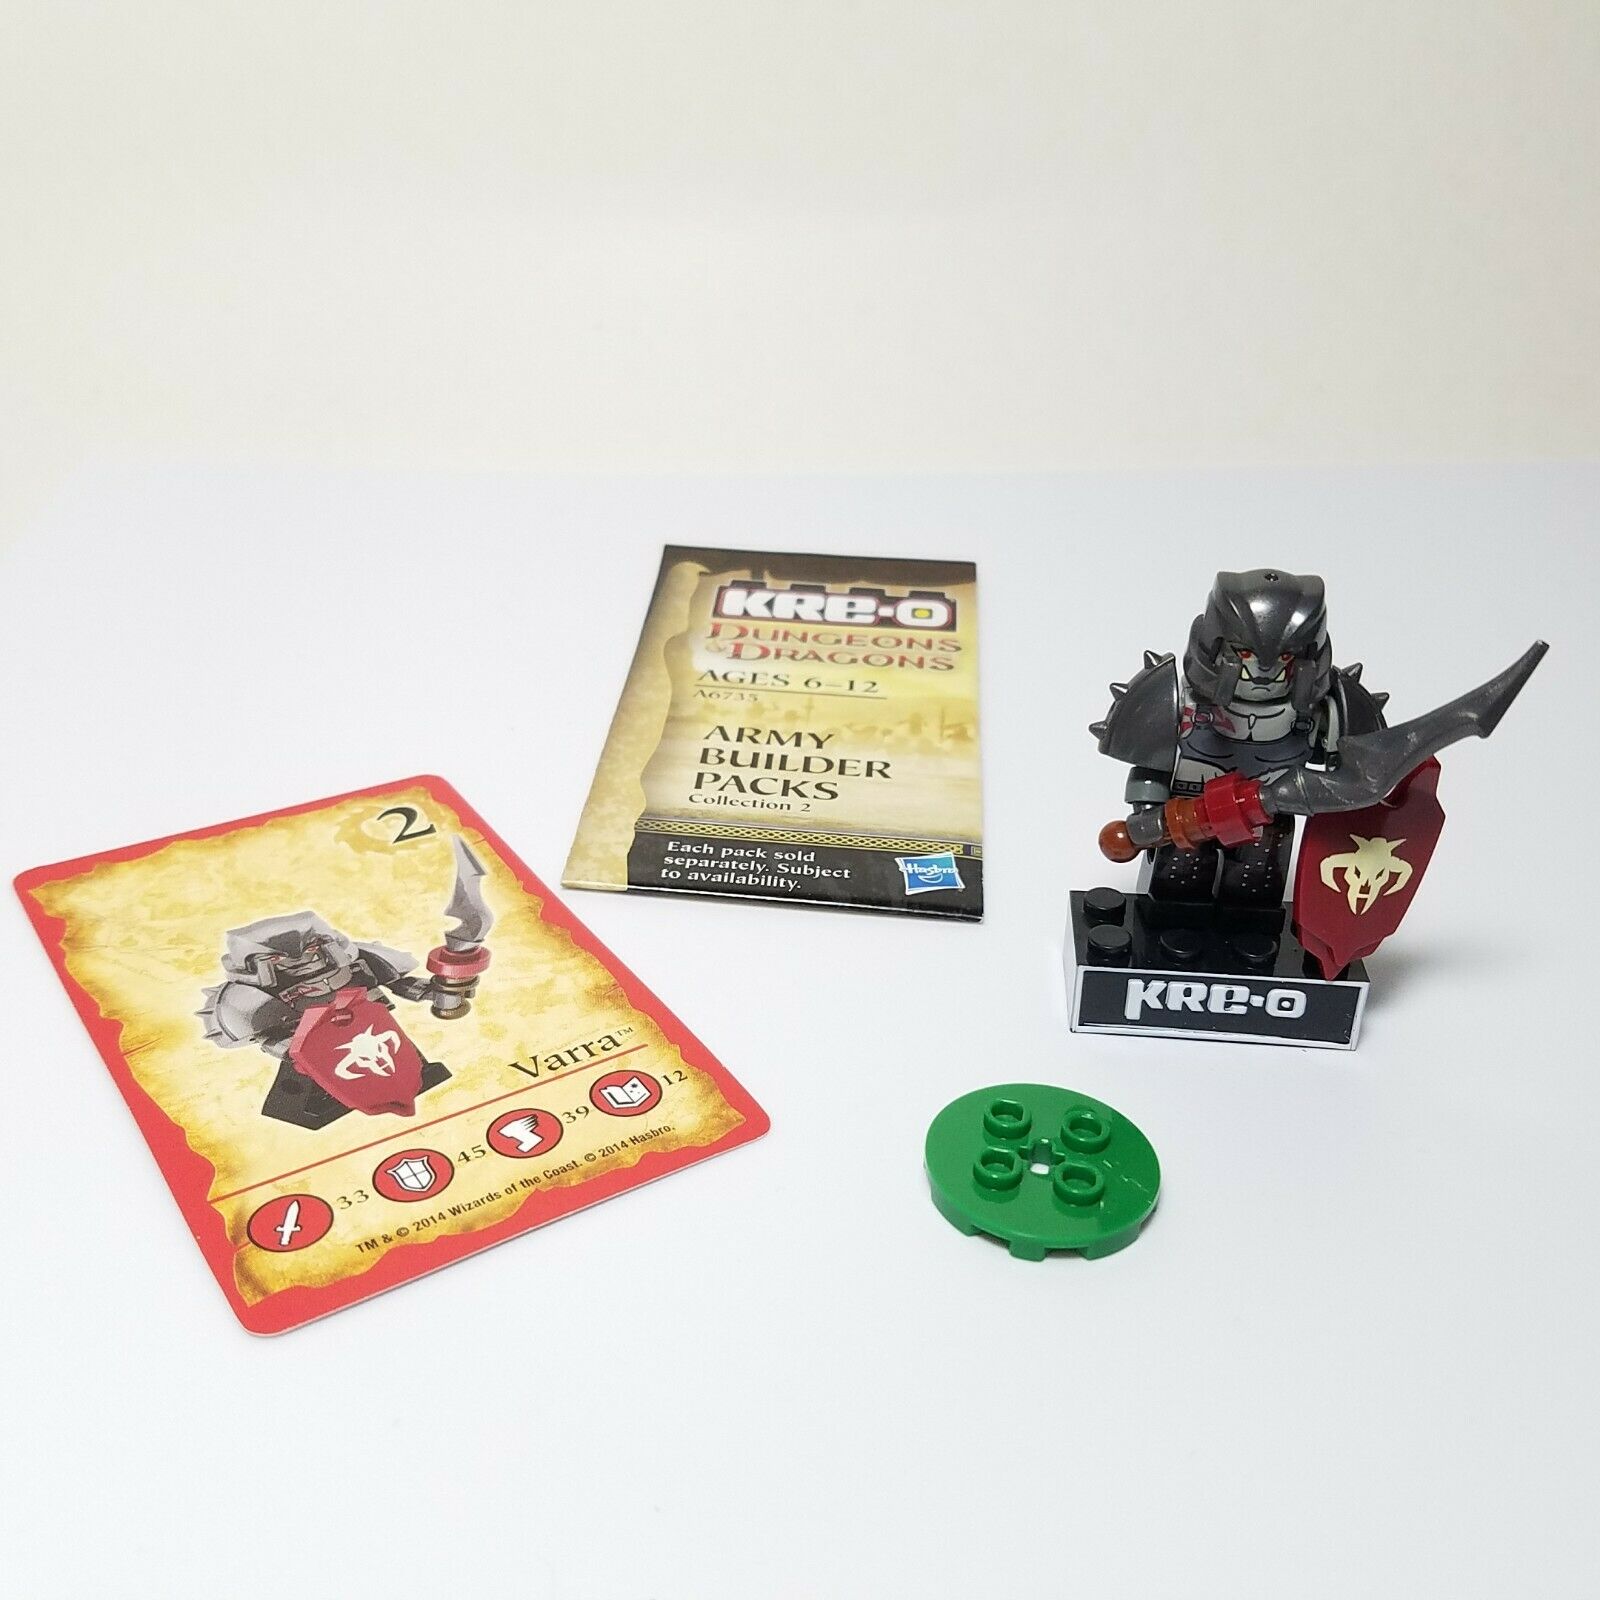 Hasbro Dungeons & Dragons Kre-o Army Builder Varra Collection 2 Loose Complete